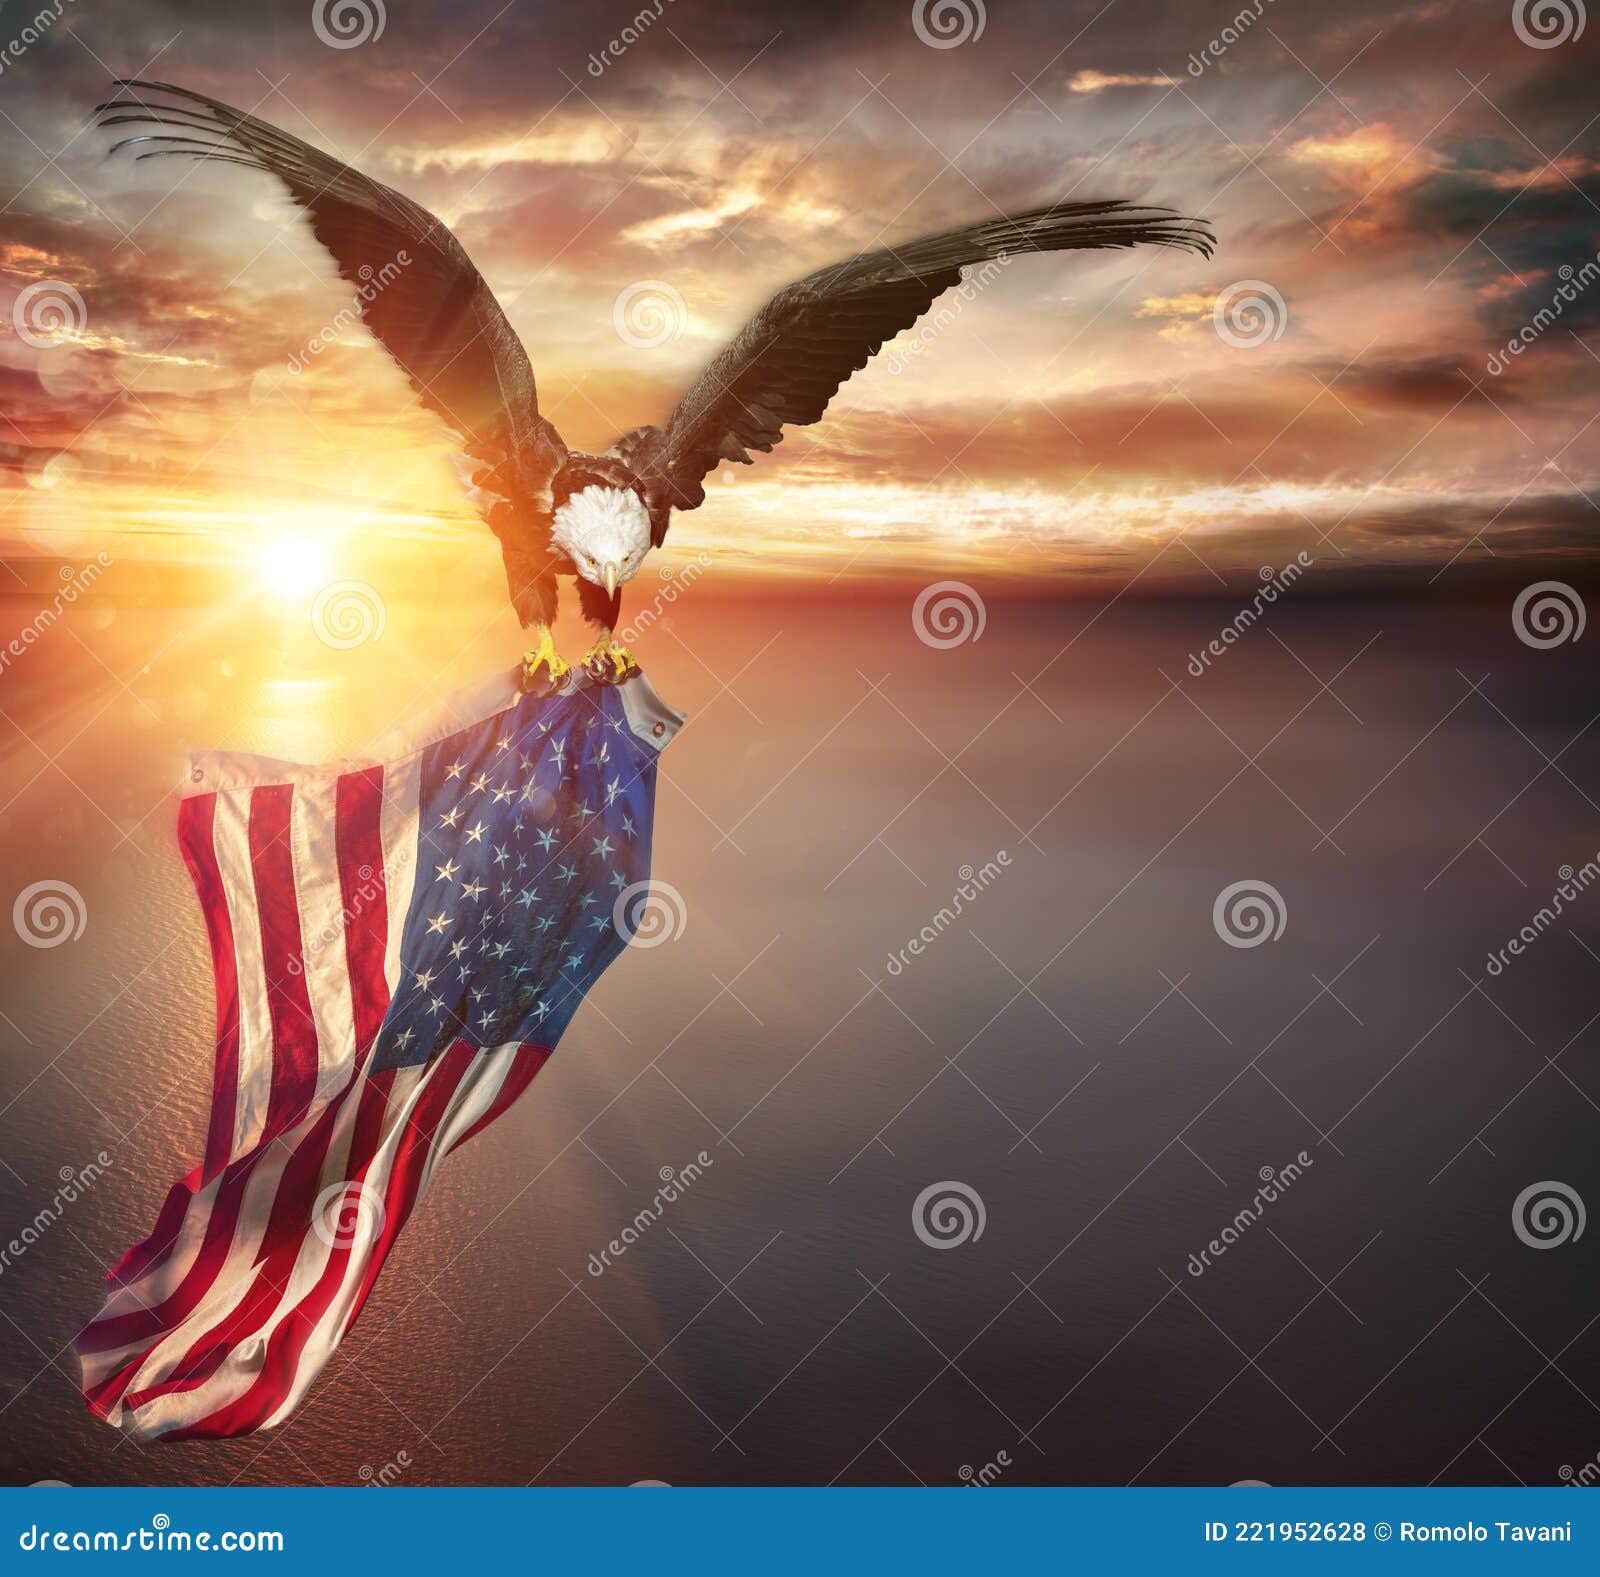 eagle with american flag flies in freedom at sunset